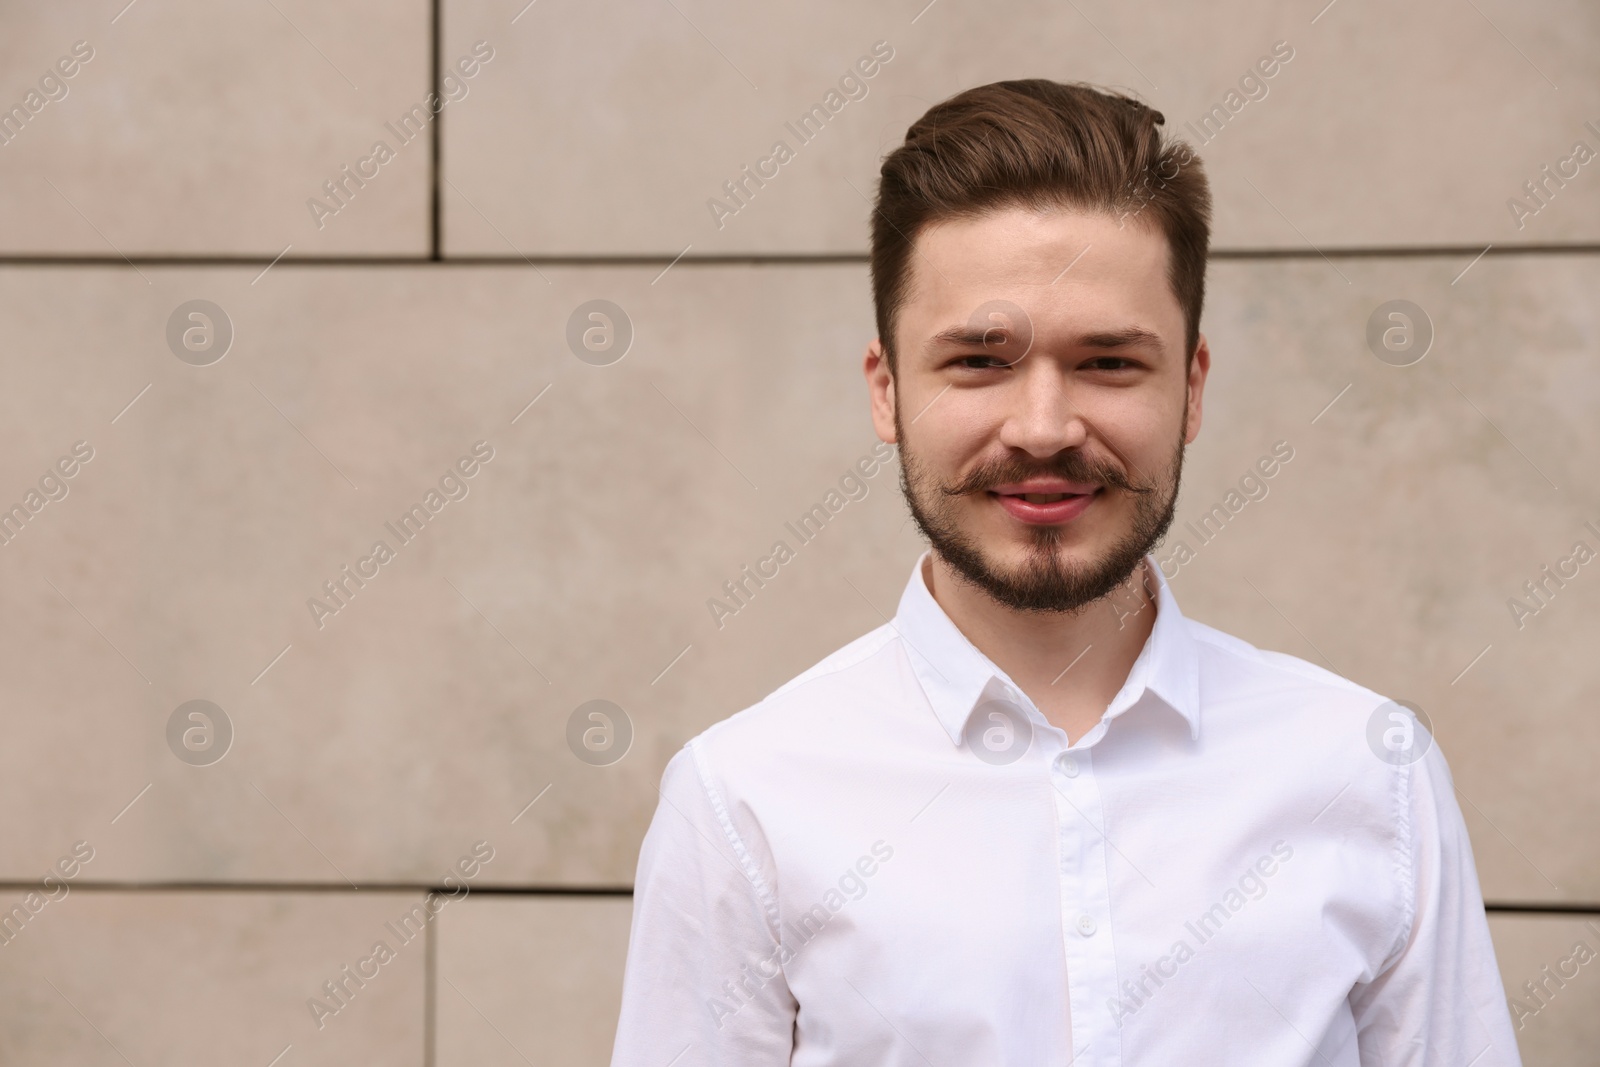 Photo of Smiling man in white shirt standing near light grey brick wall. Space for text